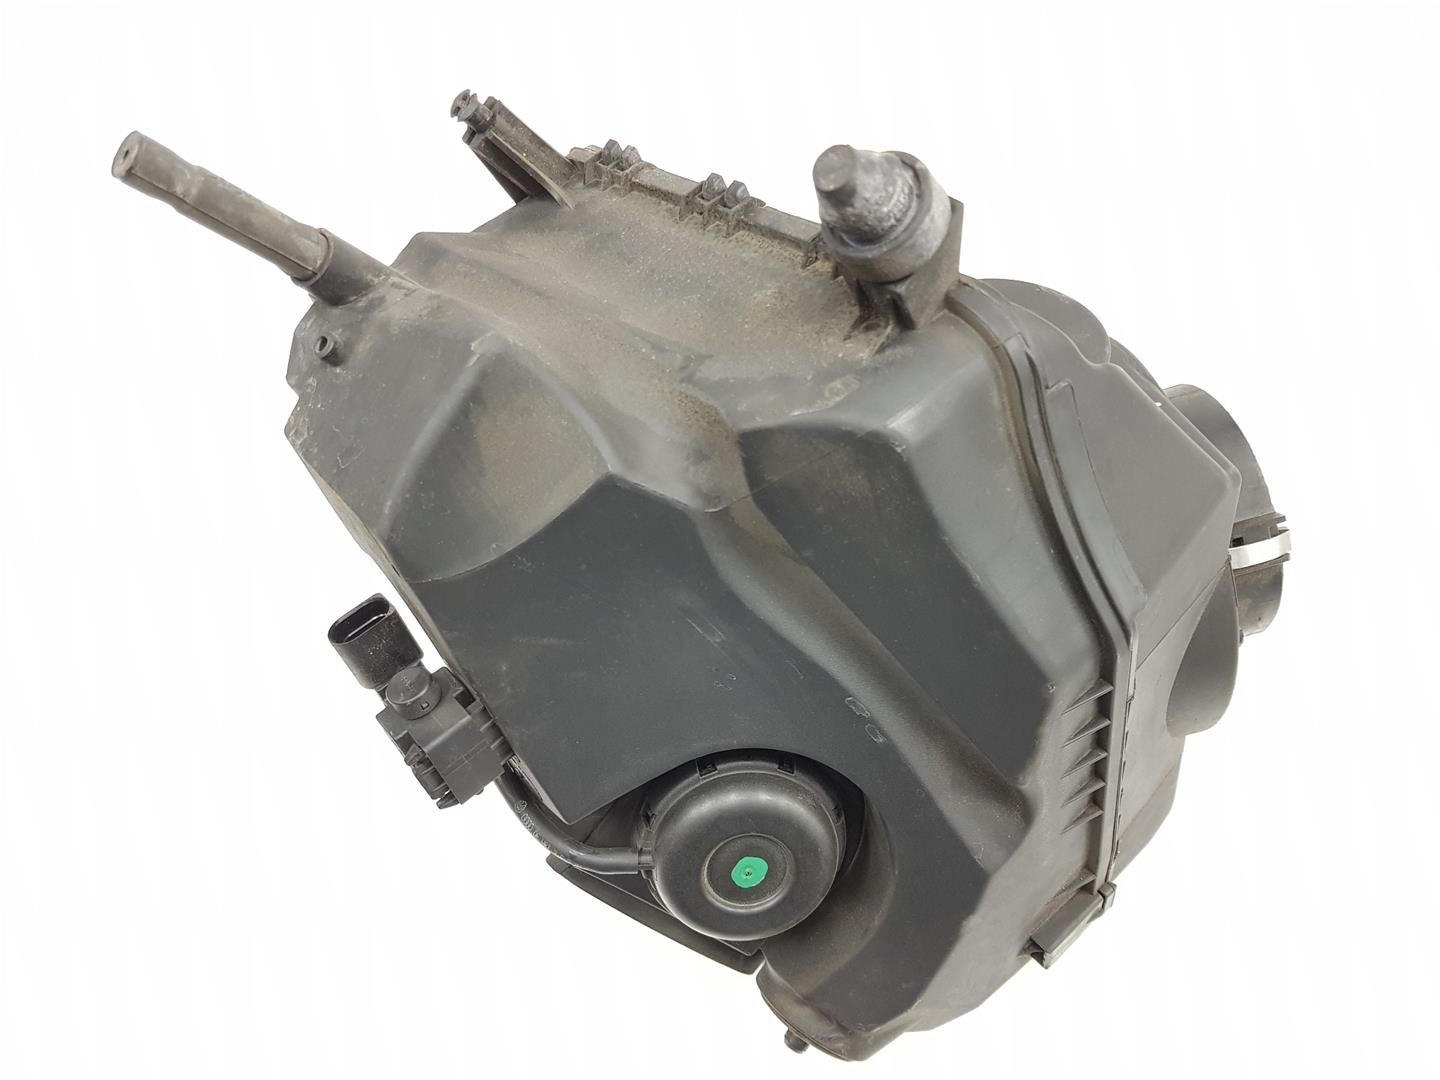 AUDI A6 allroad C6 (2006-2011) Other Engine Compartment Parts 4F0133837BB, 4F0133837BB 24198558